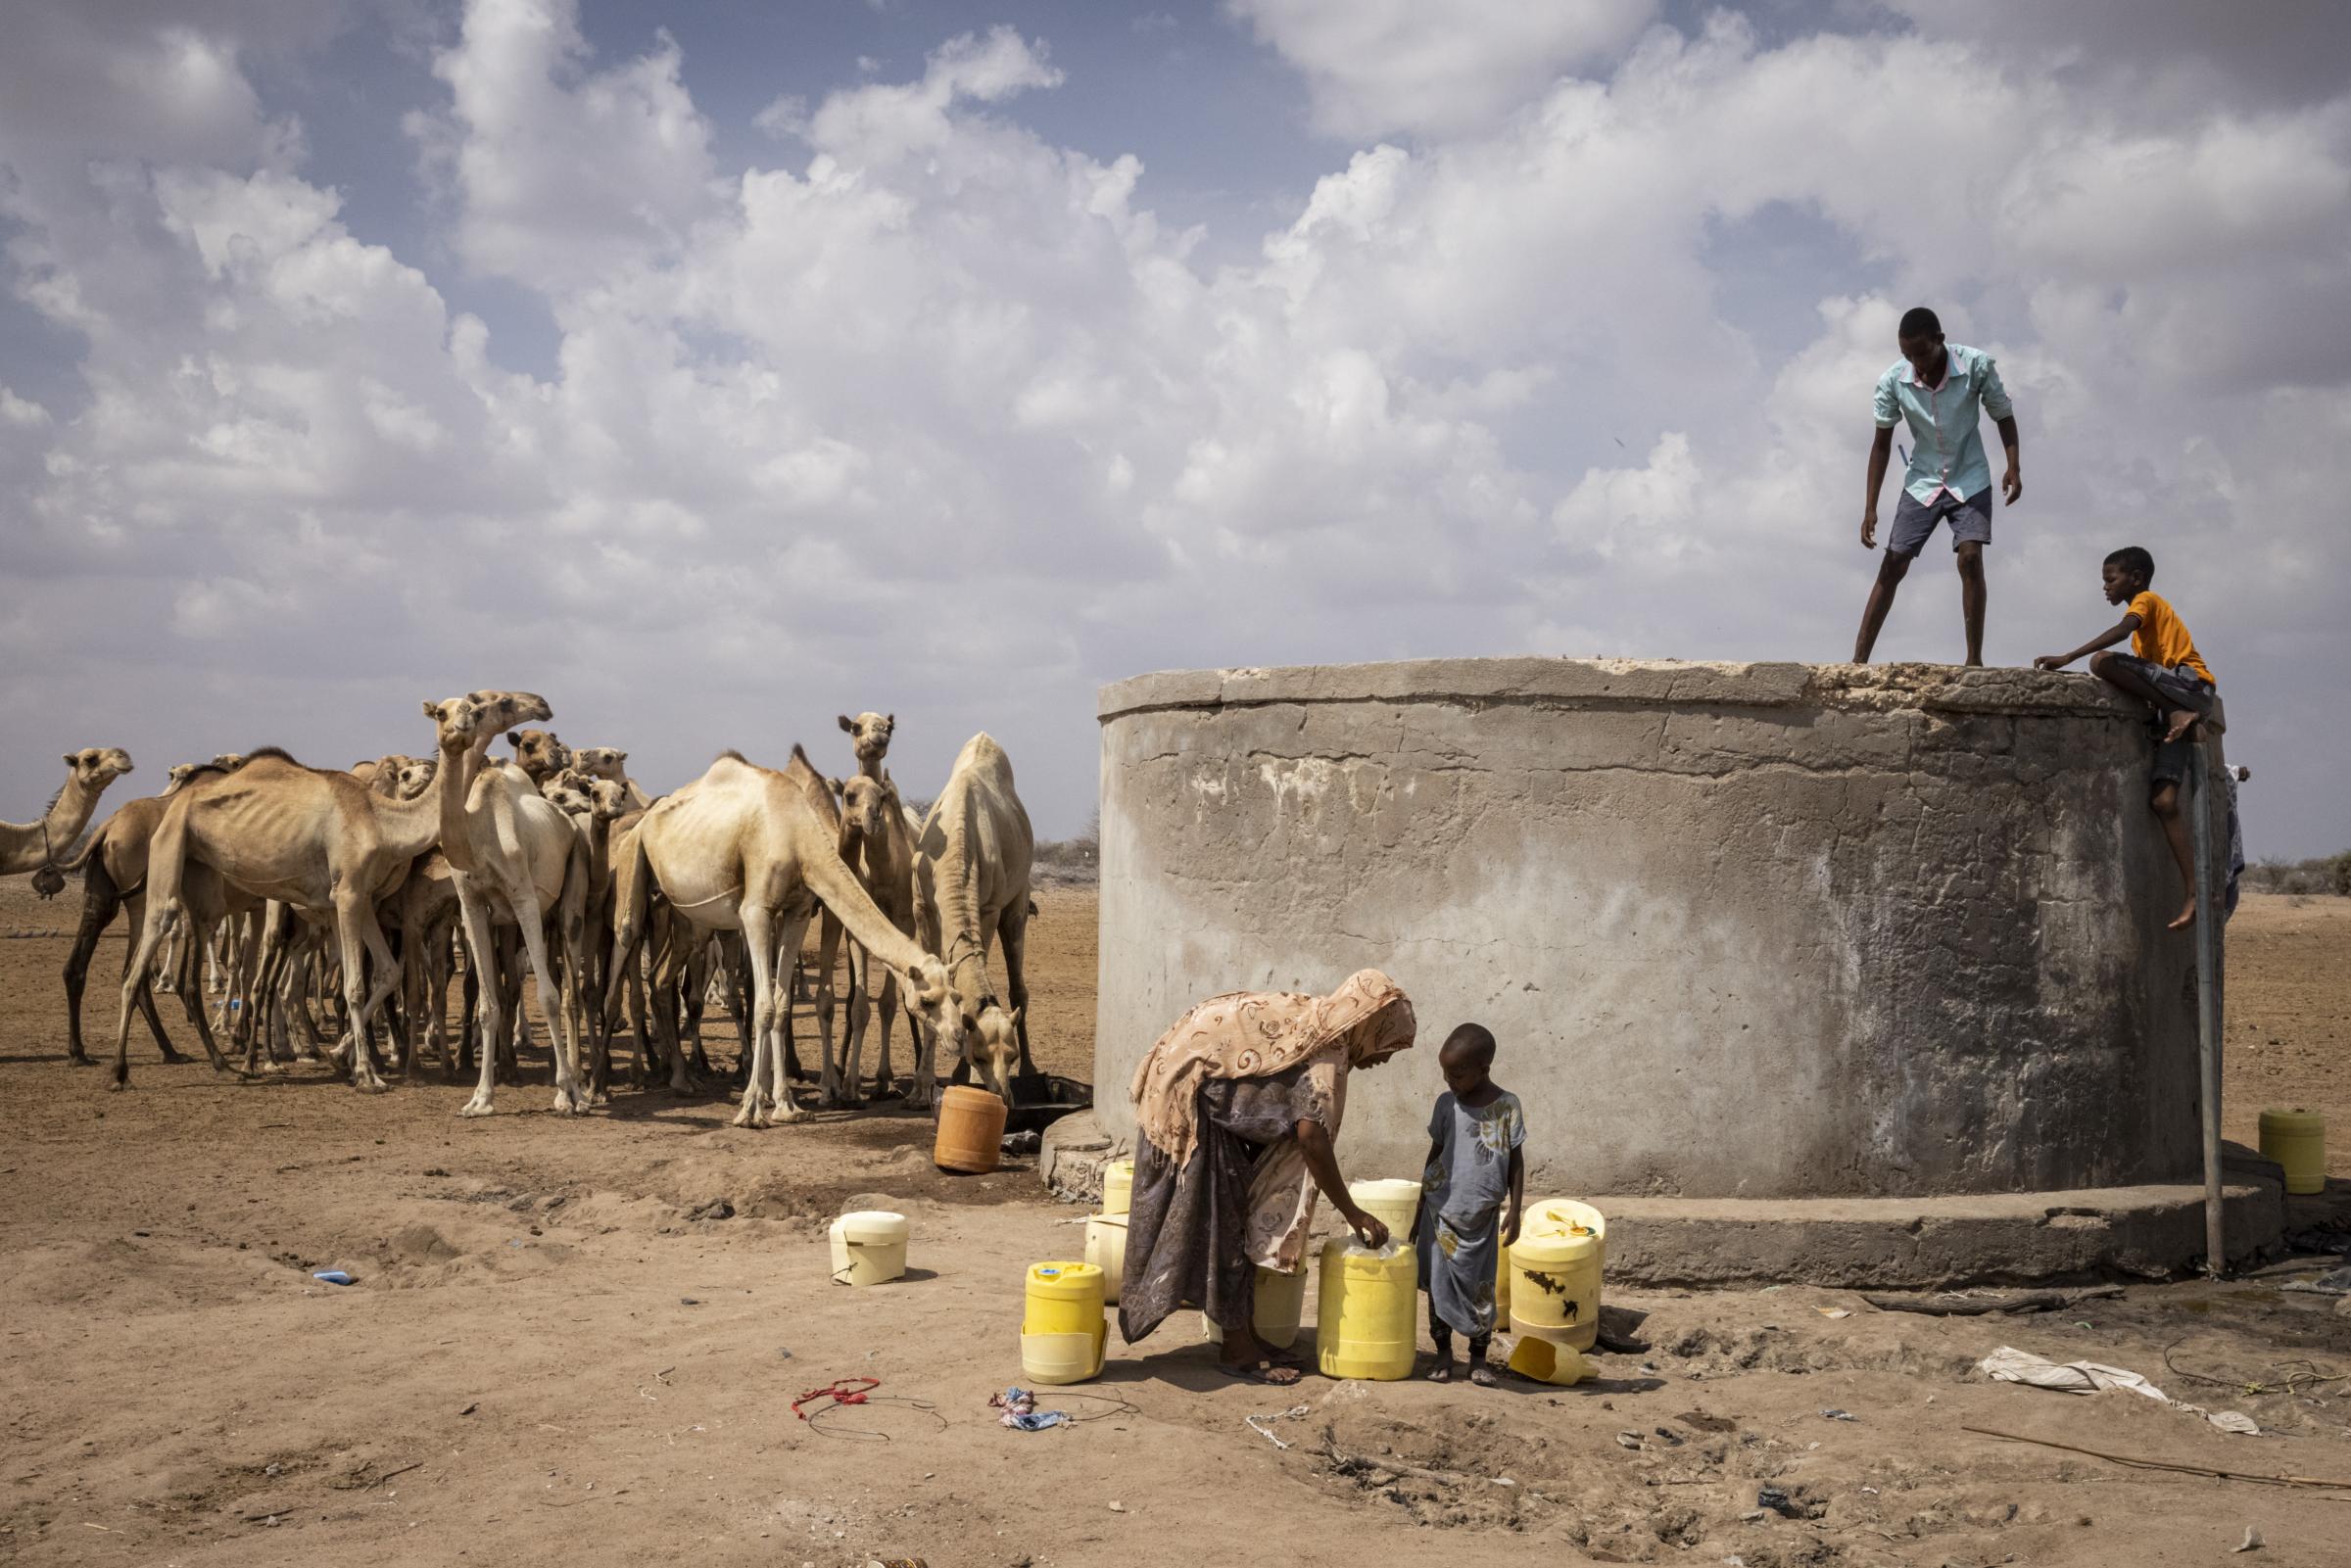 WAJIR COUNTY, KENYA - DECEMBER 09: Camels weak from lack sustenance stand behind a salt water well as they migrate to find food near Mochesa in Wajir county on December 9, 2021 in Nairobi, Kenya. A prolonged drought in the countrys north east has